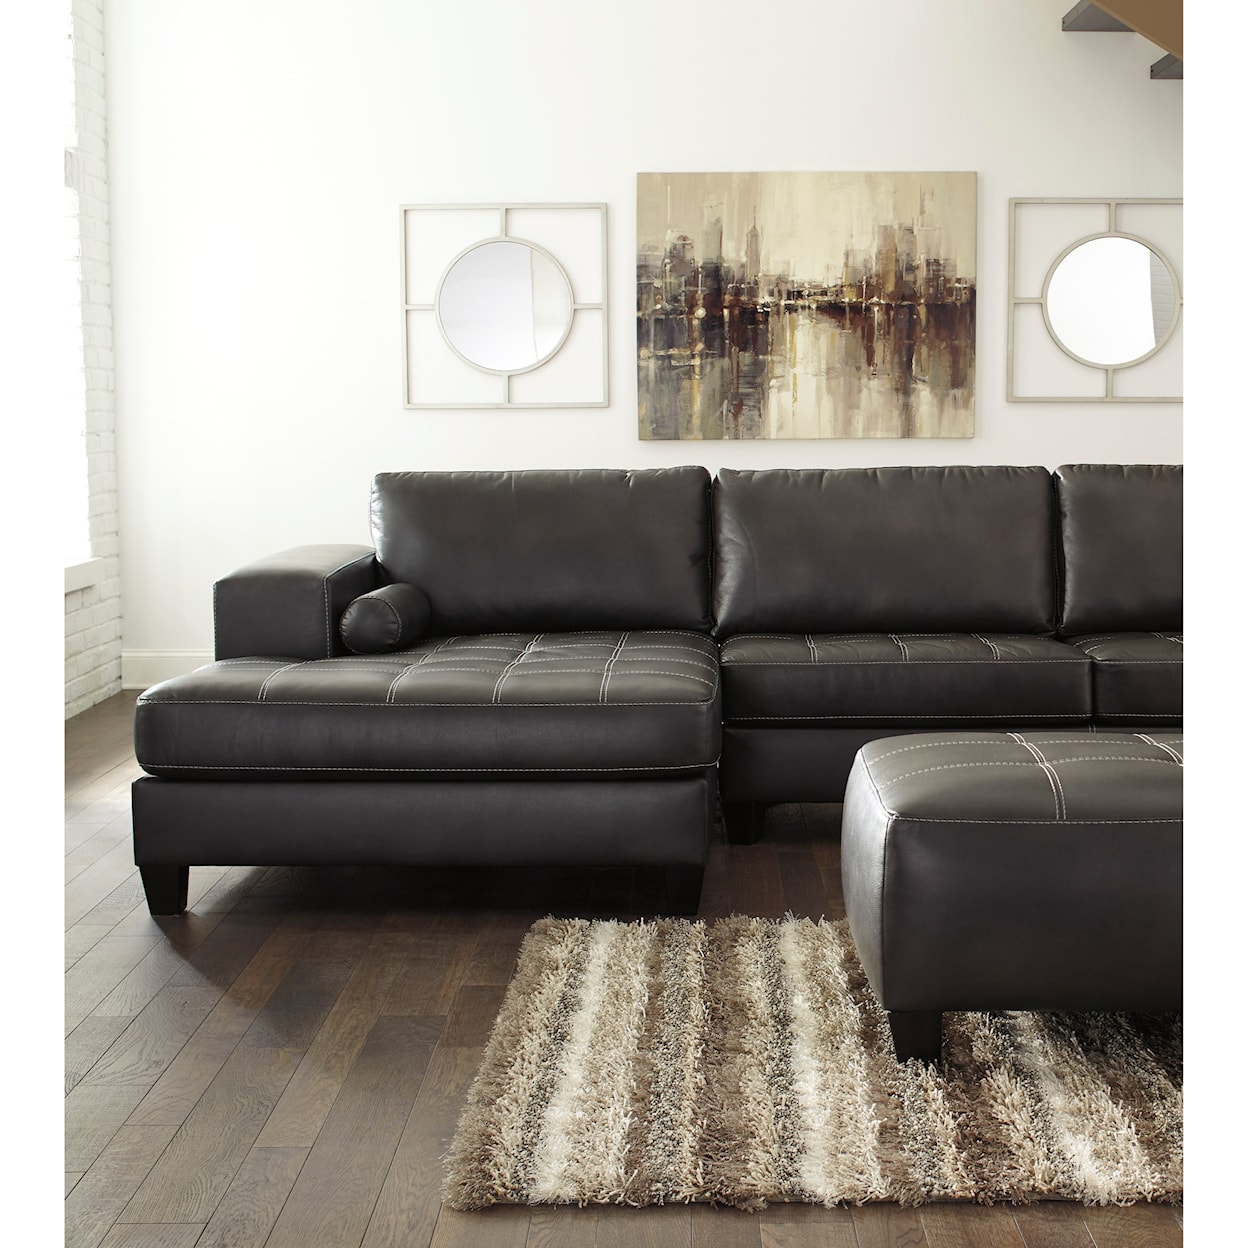 Signature Design by Ashley Nokomis 2-Piece Sectional with Left Chaise